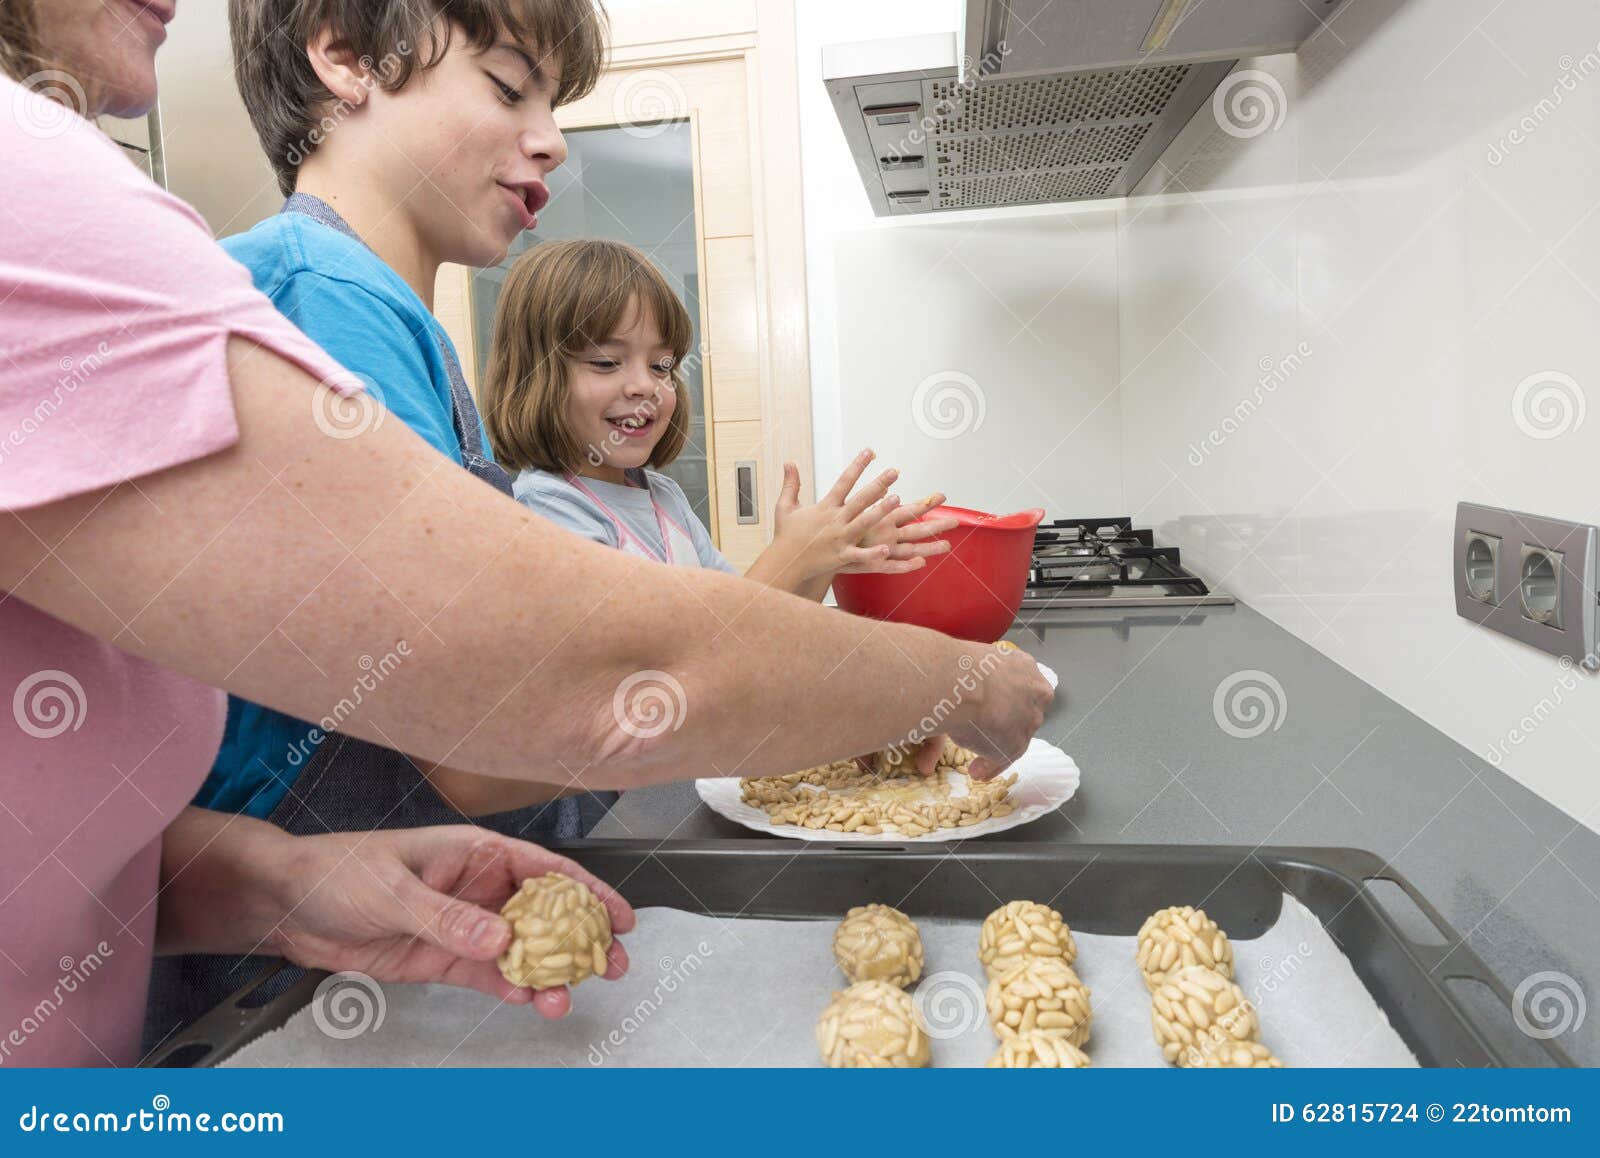 family preparing sweets in the kitchen